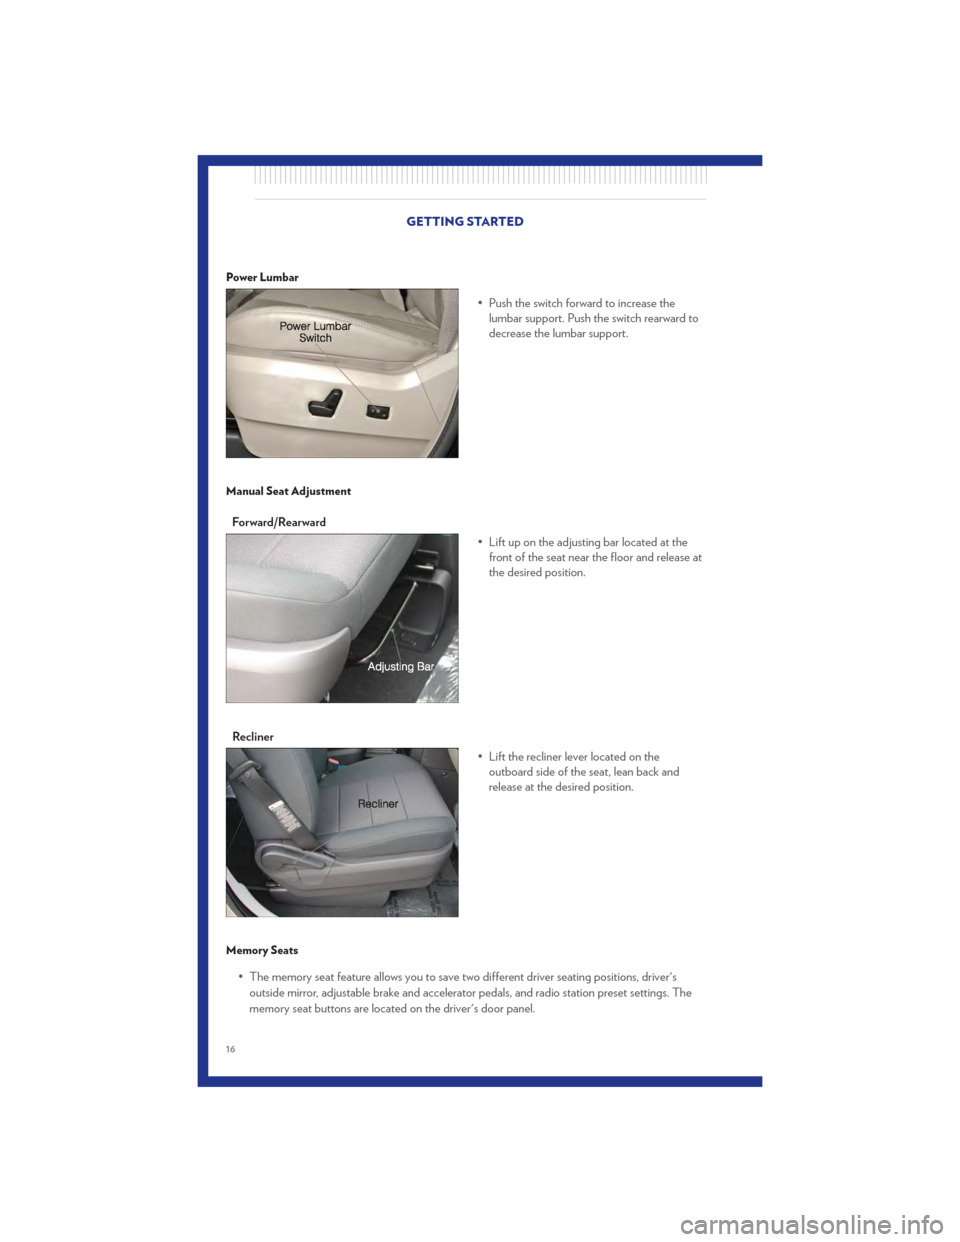 CHRYSLER TOWN AND COUNTRY 2011 5.G Owners Manual Power Lumbar
• Push the switch forward to increase thelumbar support. Push the switch rearward to
decrease the lumbar support.
Manual Seat Adjustment
Forward/Rearward
• Lift up on the adjusting ba